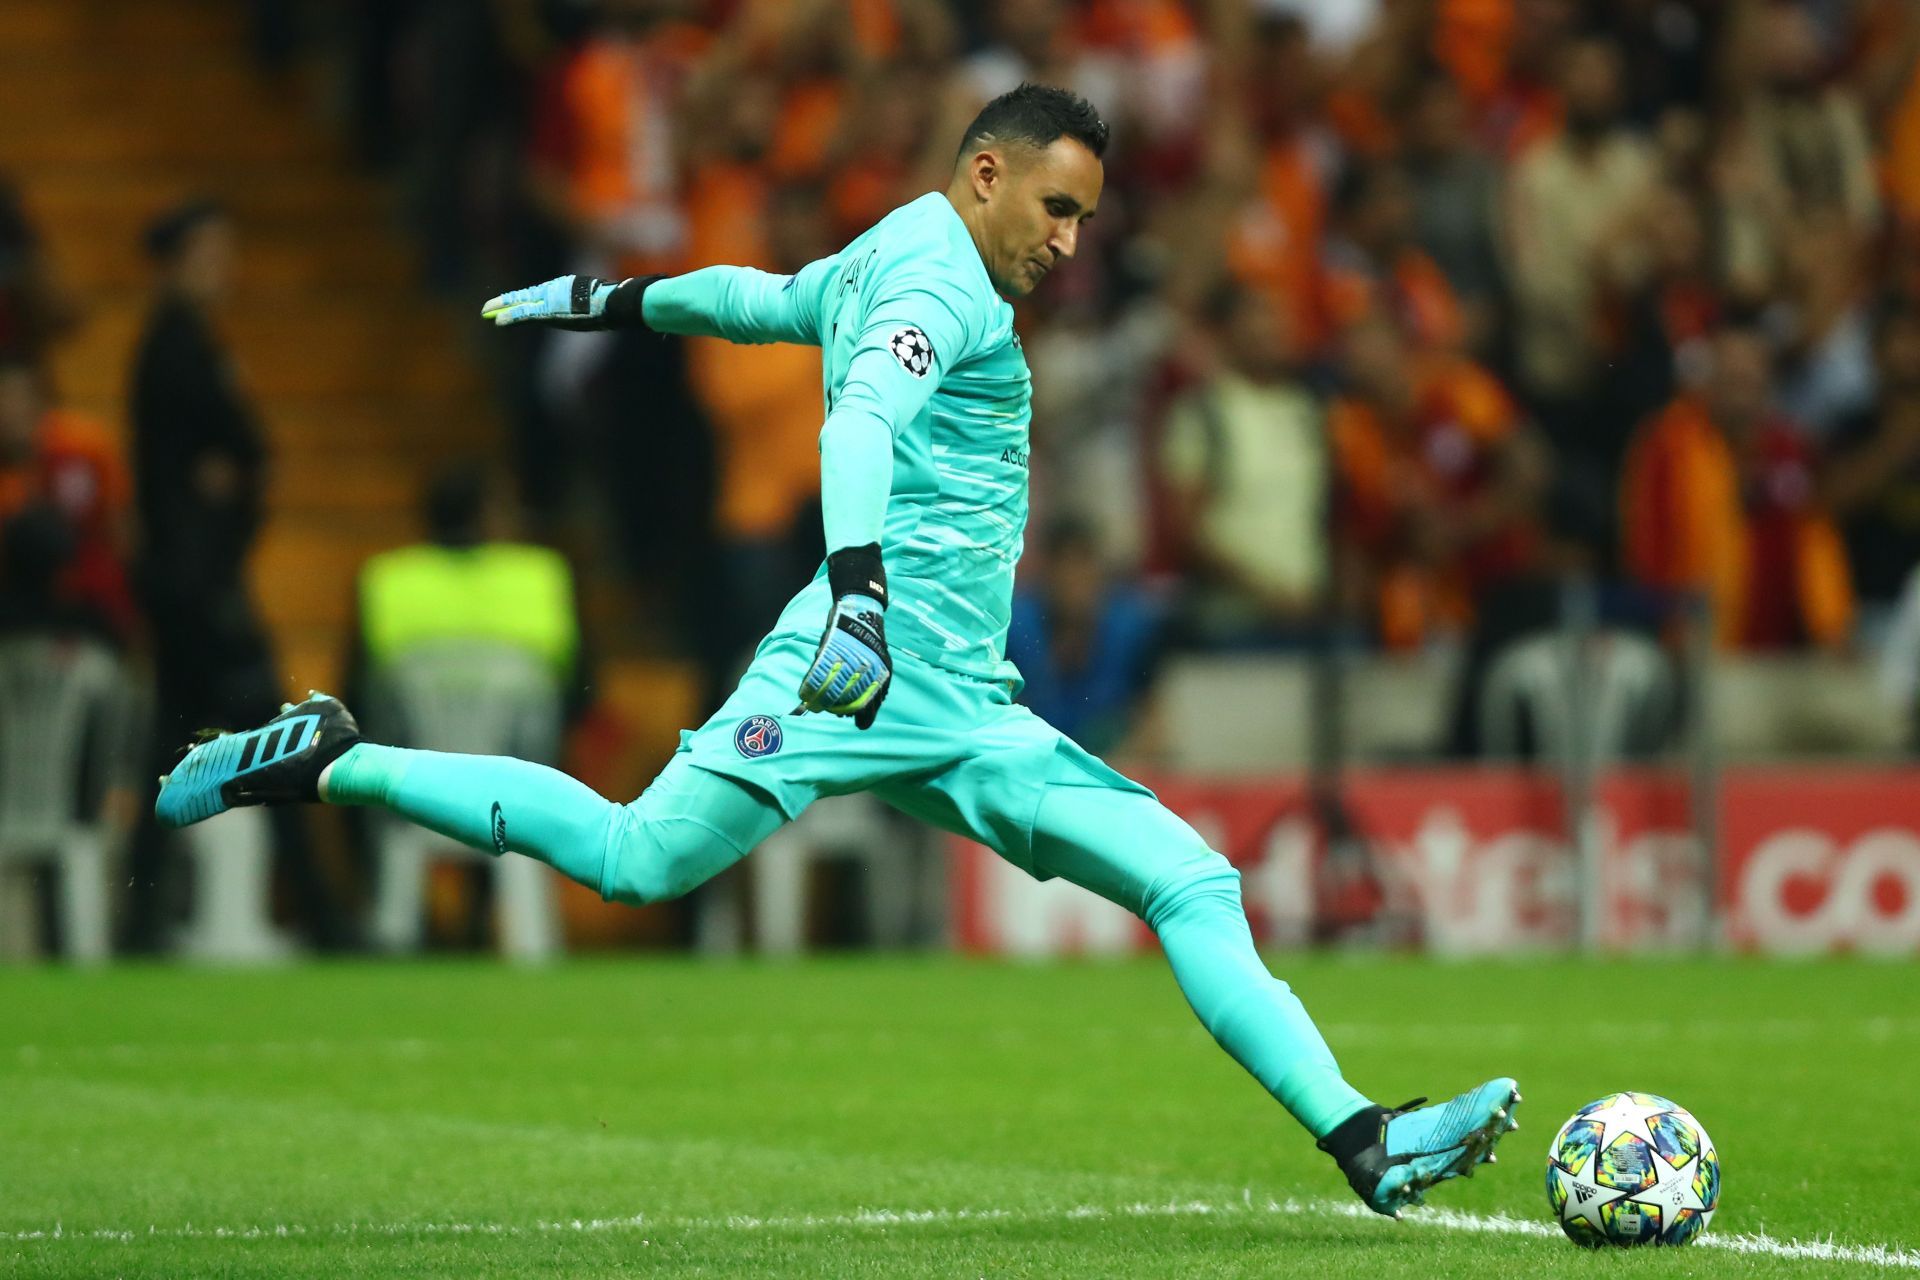 Keylor Navas is among the leading players in the world